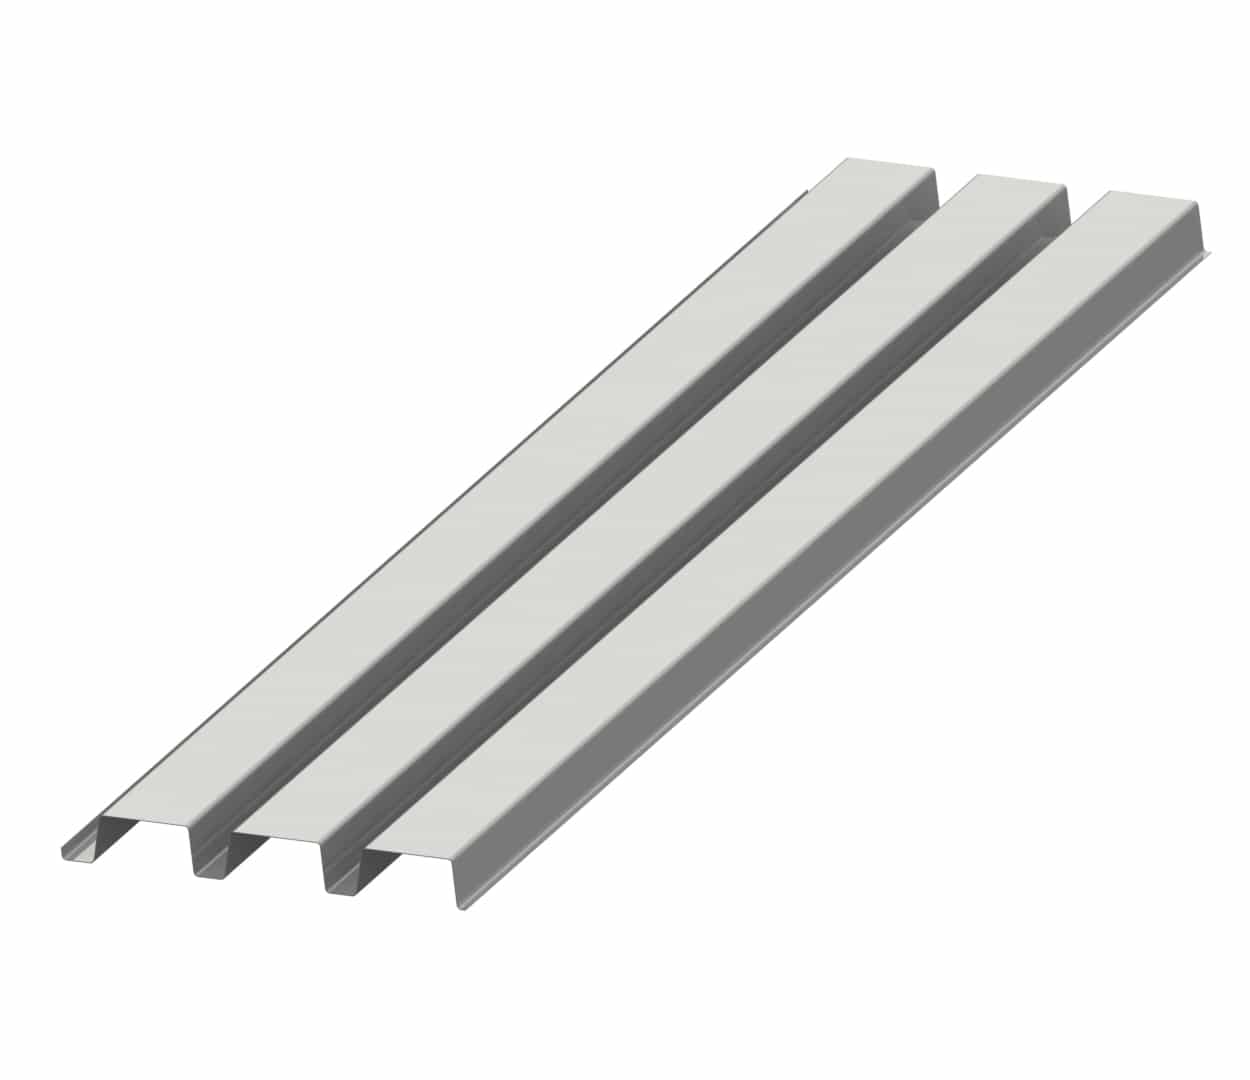 This product image shows an N roof deck deep rib from ODonnell Metal Deck